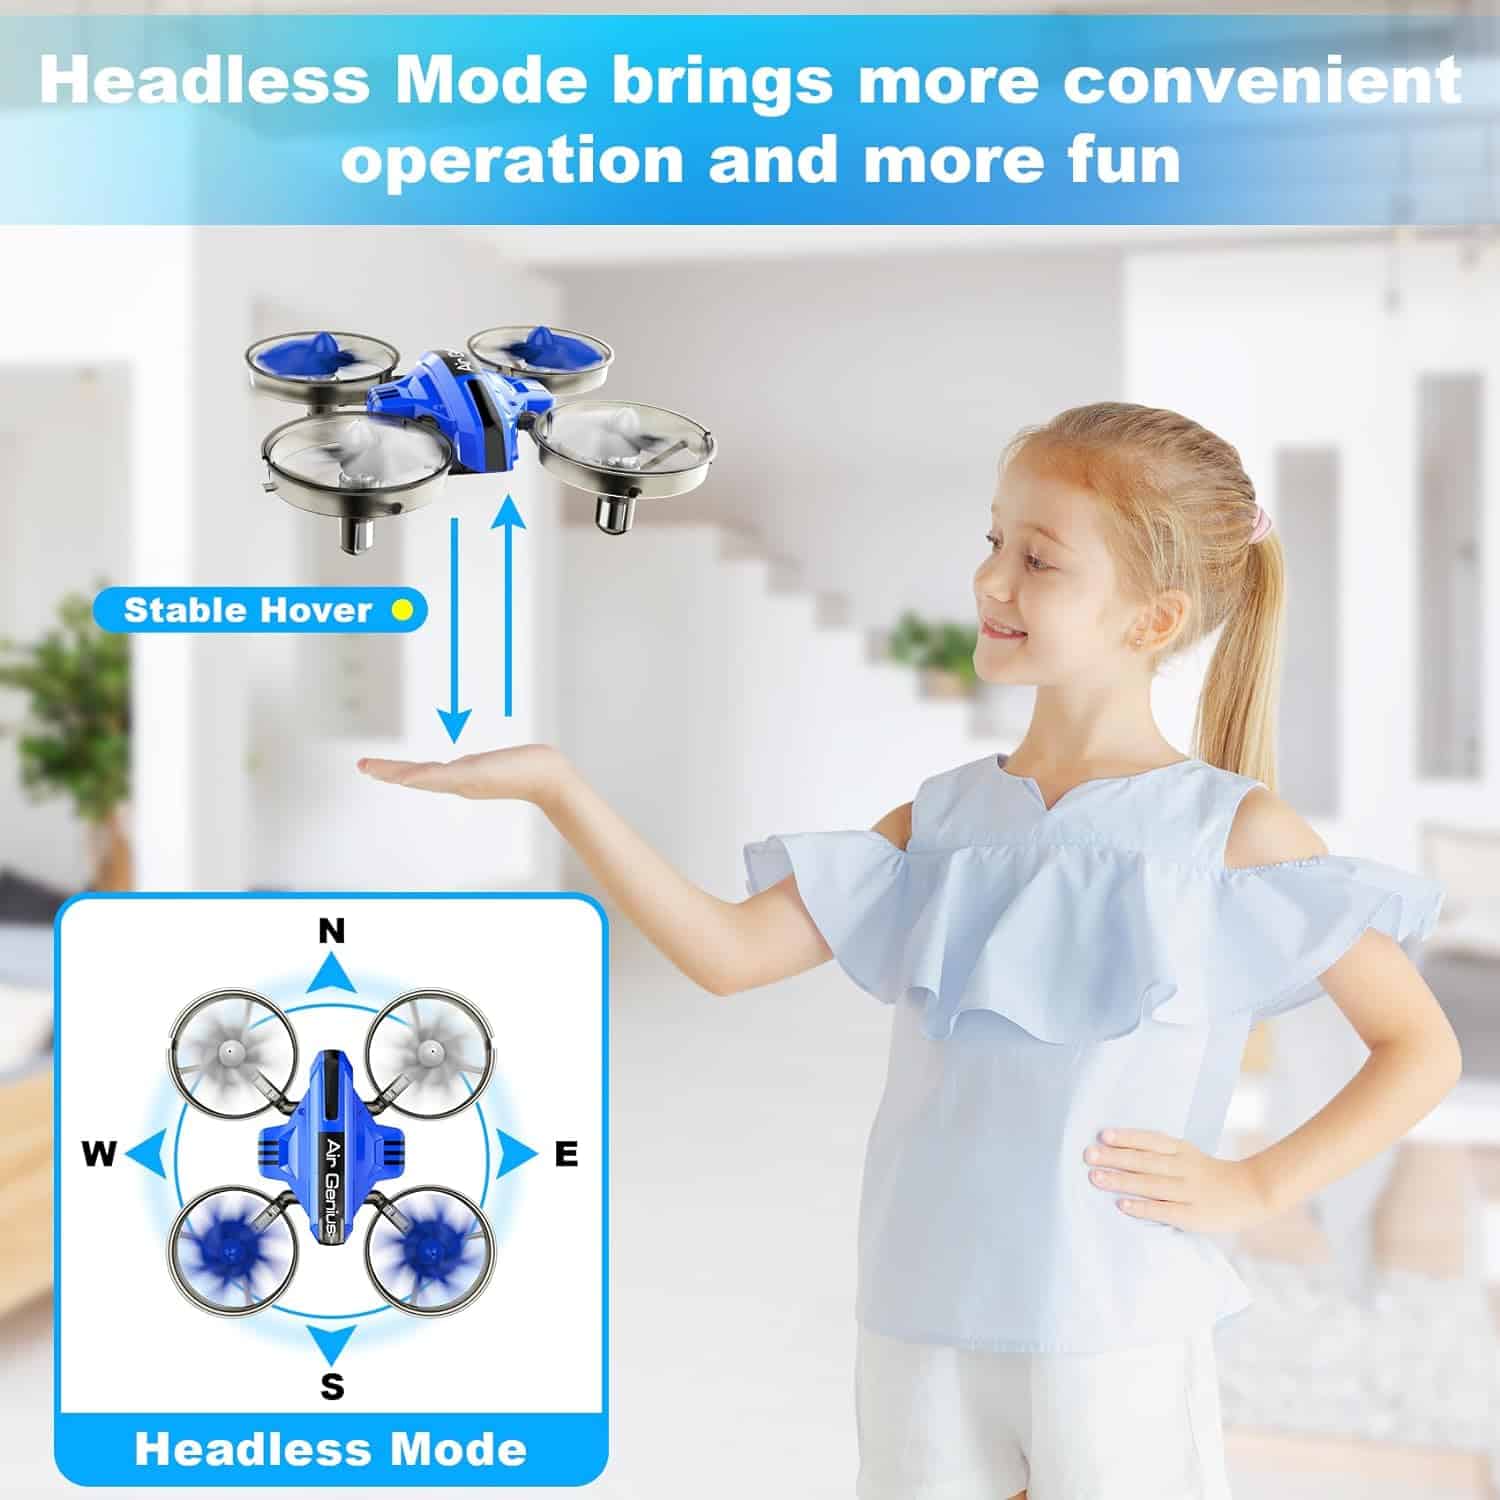 Oddire Mini Drone for Kids 8-12 & Adults: The Ultimate 2-in-1 Toy Review